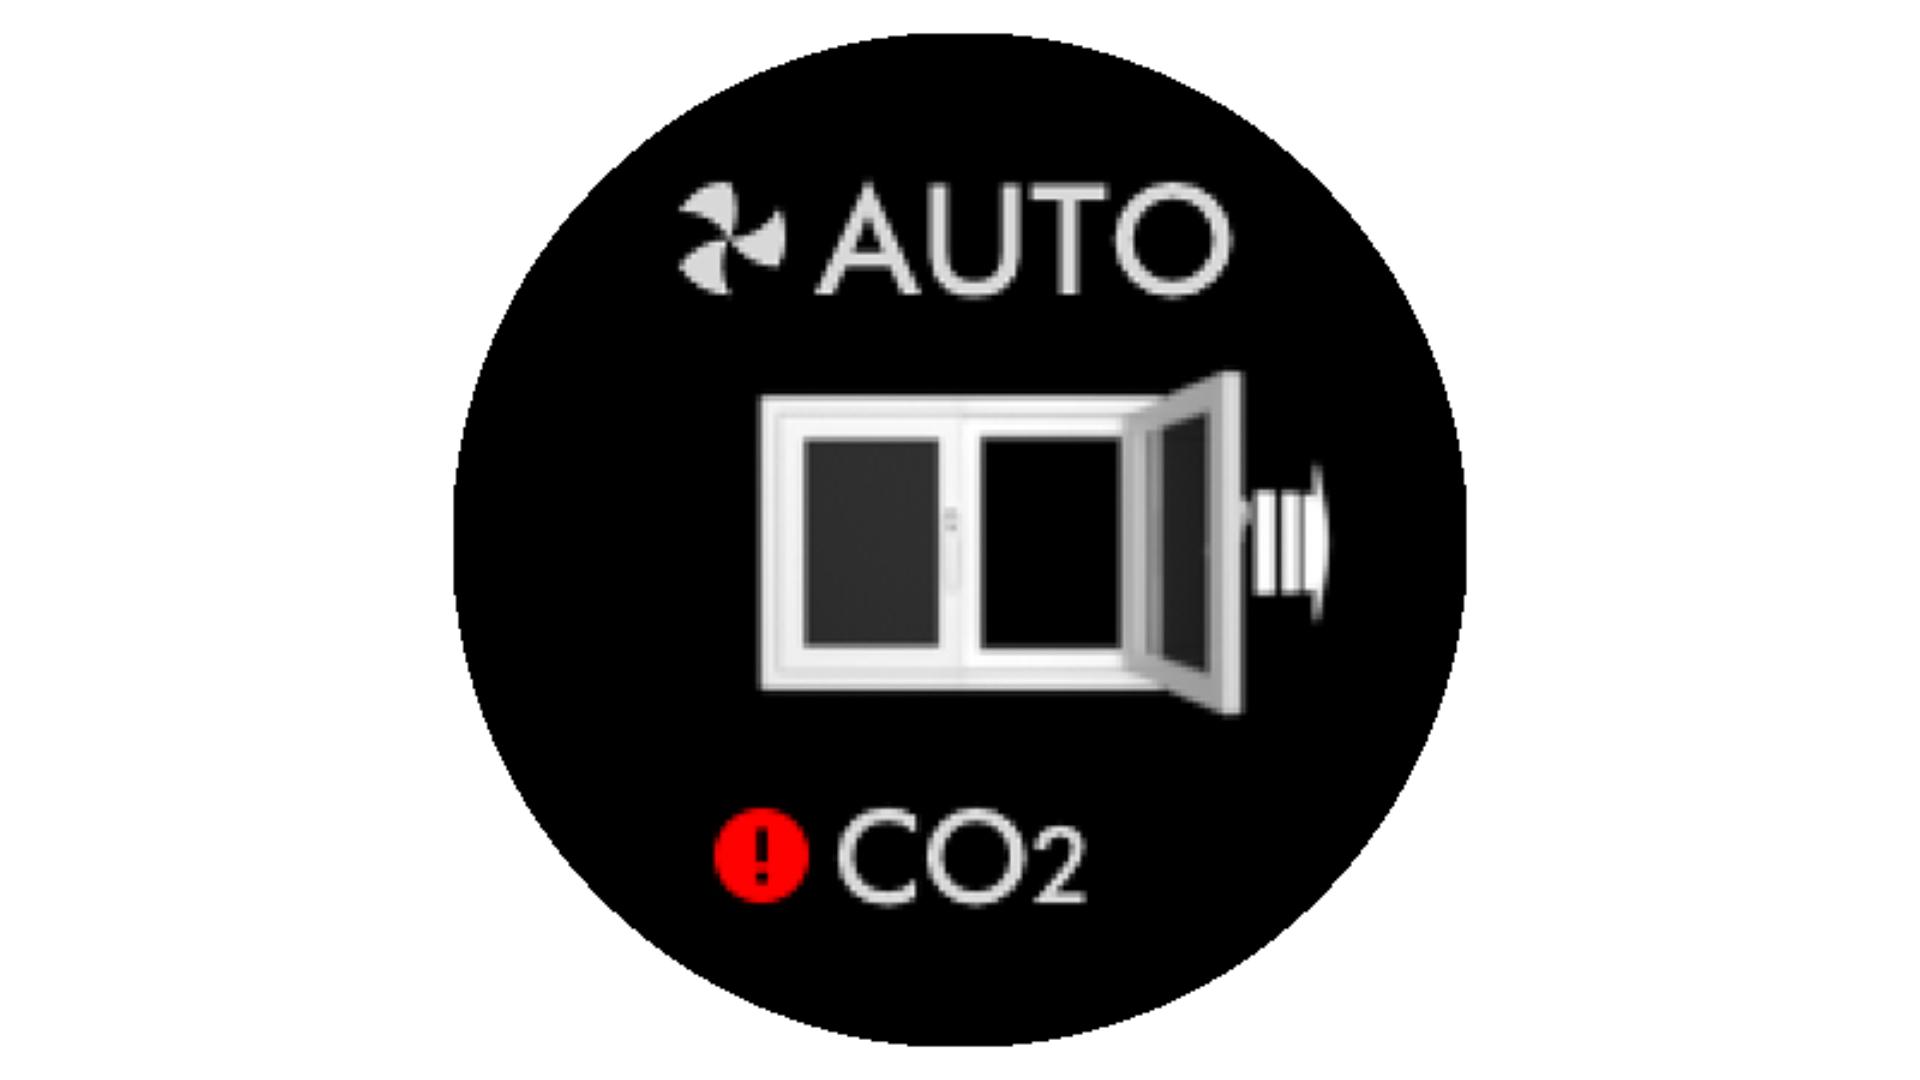 LCD screen of CO₂ levels